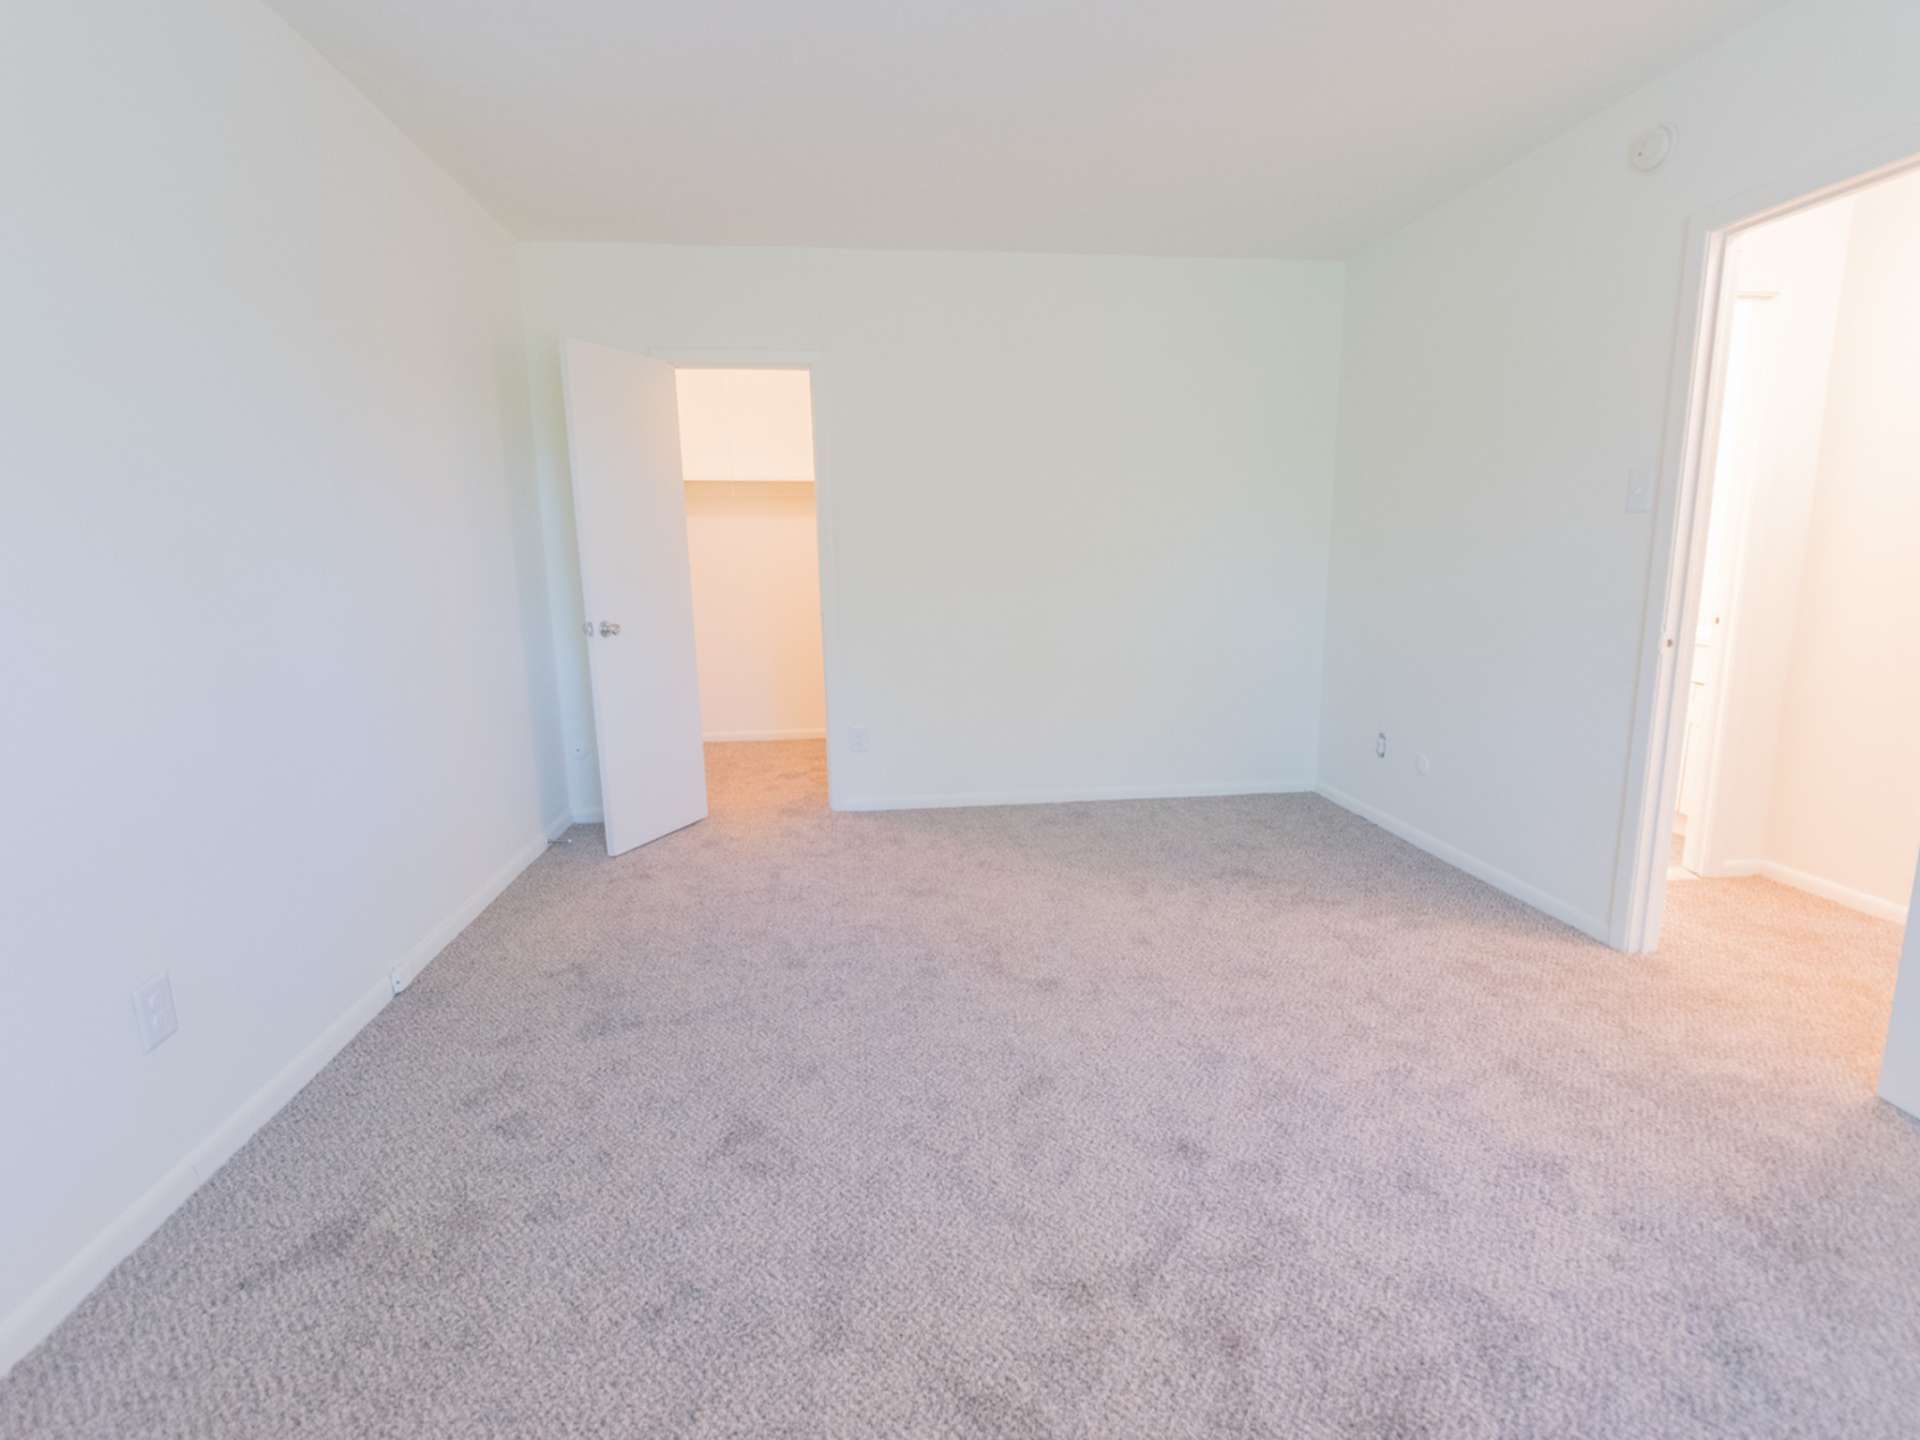 Spacious and carpeted bedroom with a closet and white walls.